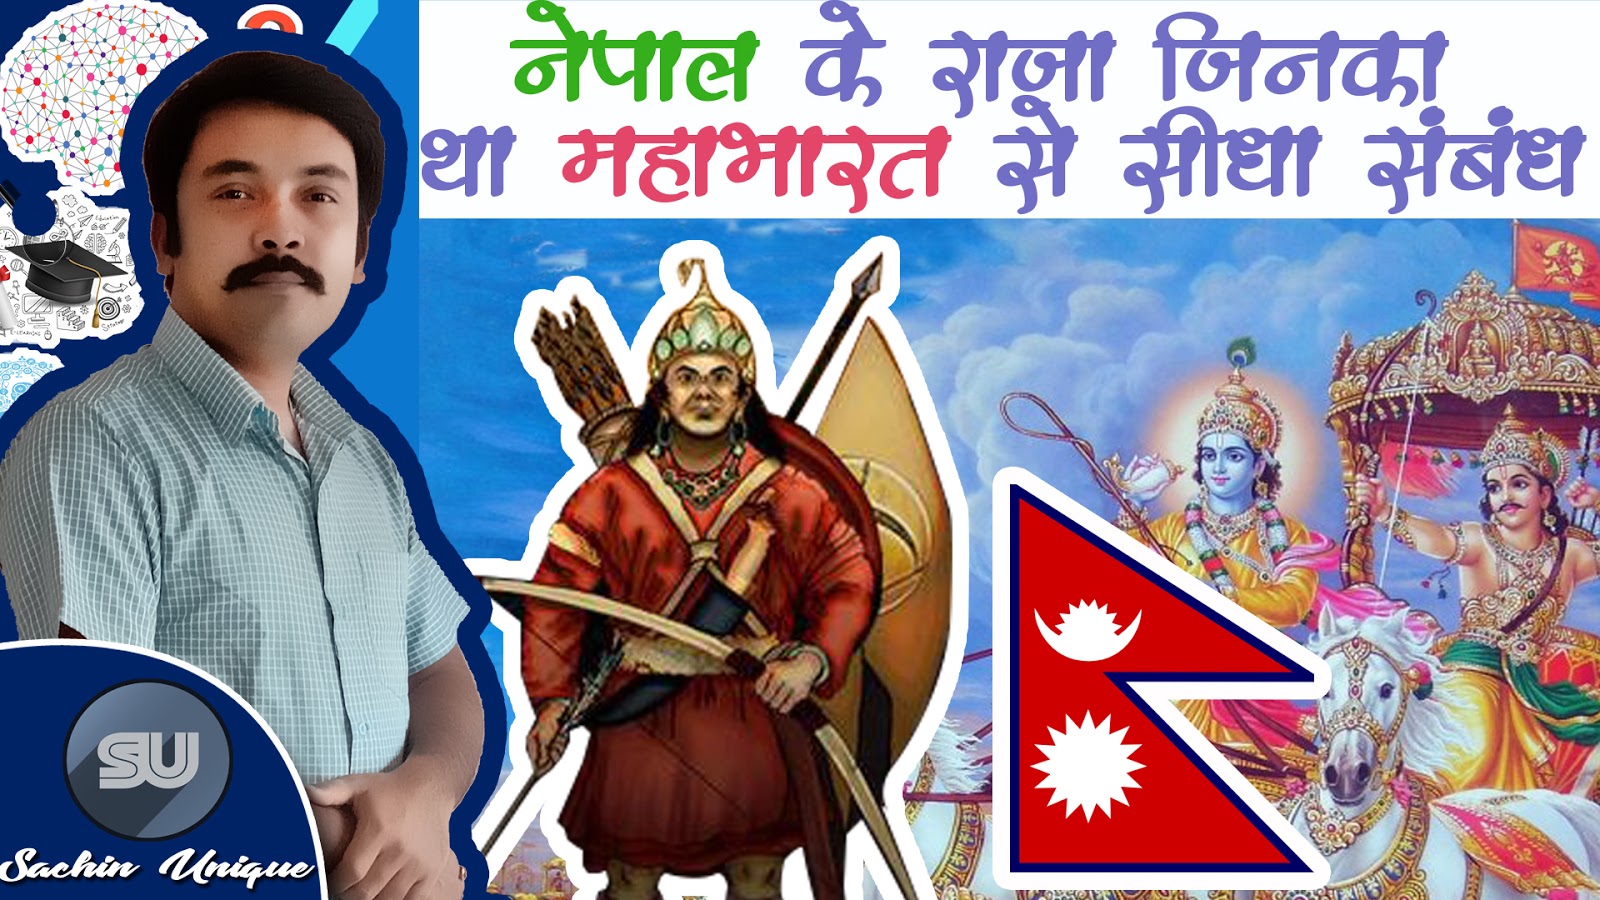 Nepal King That Directly Connected With Epic Mahabharat War Before the mahabharat war began, lord krishna asked all the warriors how many days it would take but barbarik astonished krishna with his answer. epic mahabharat war